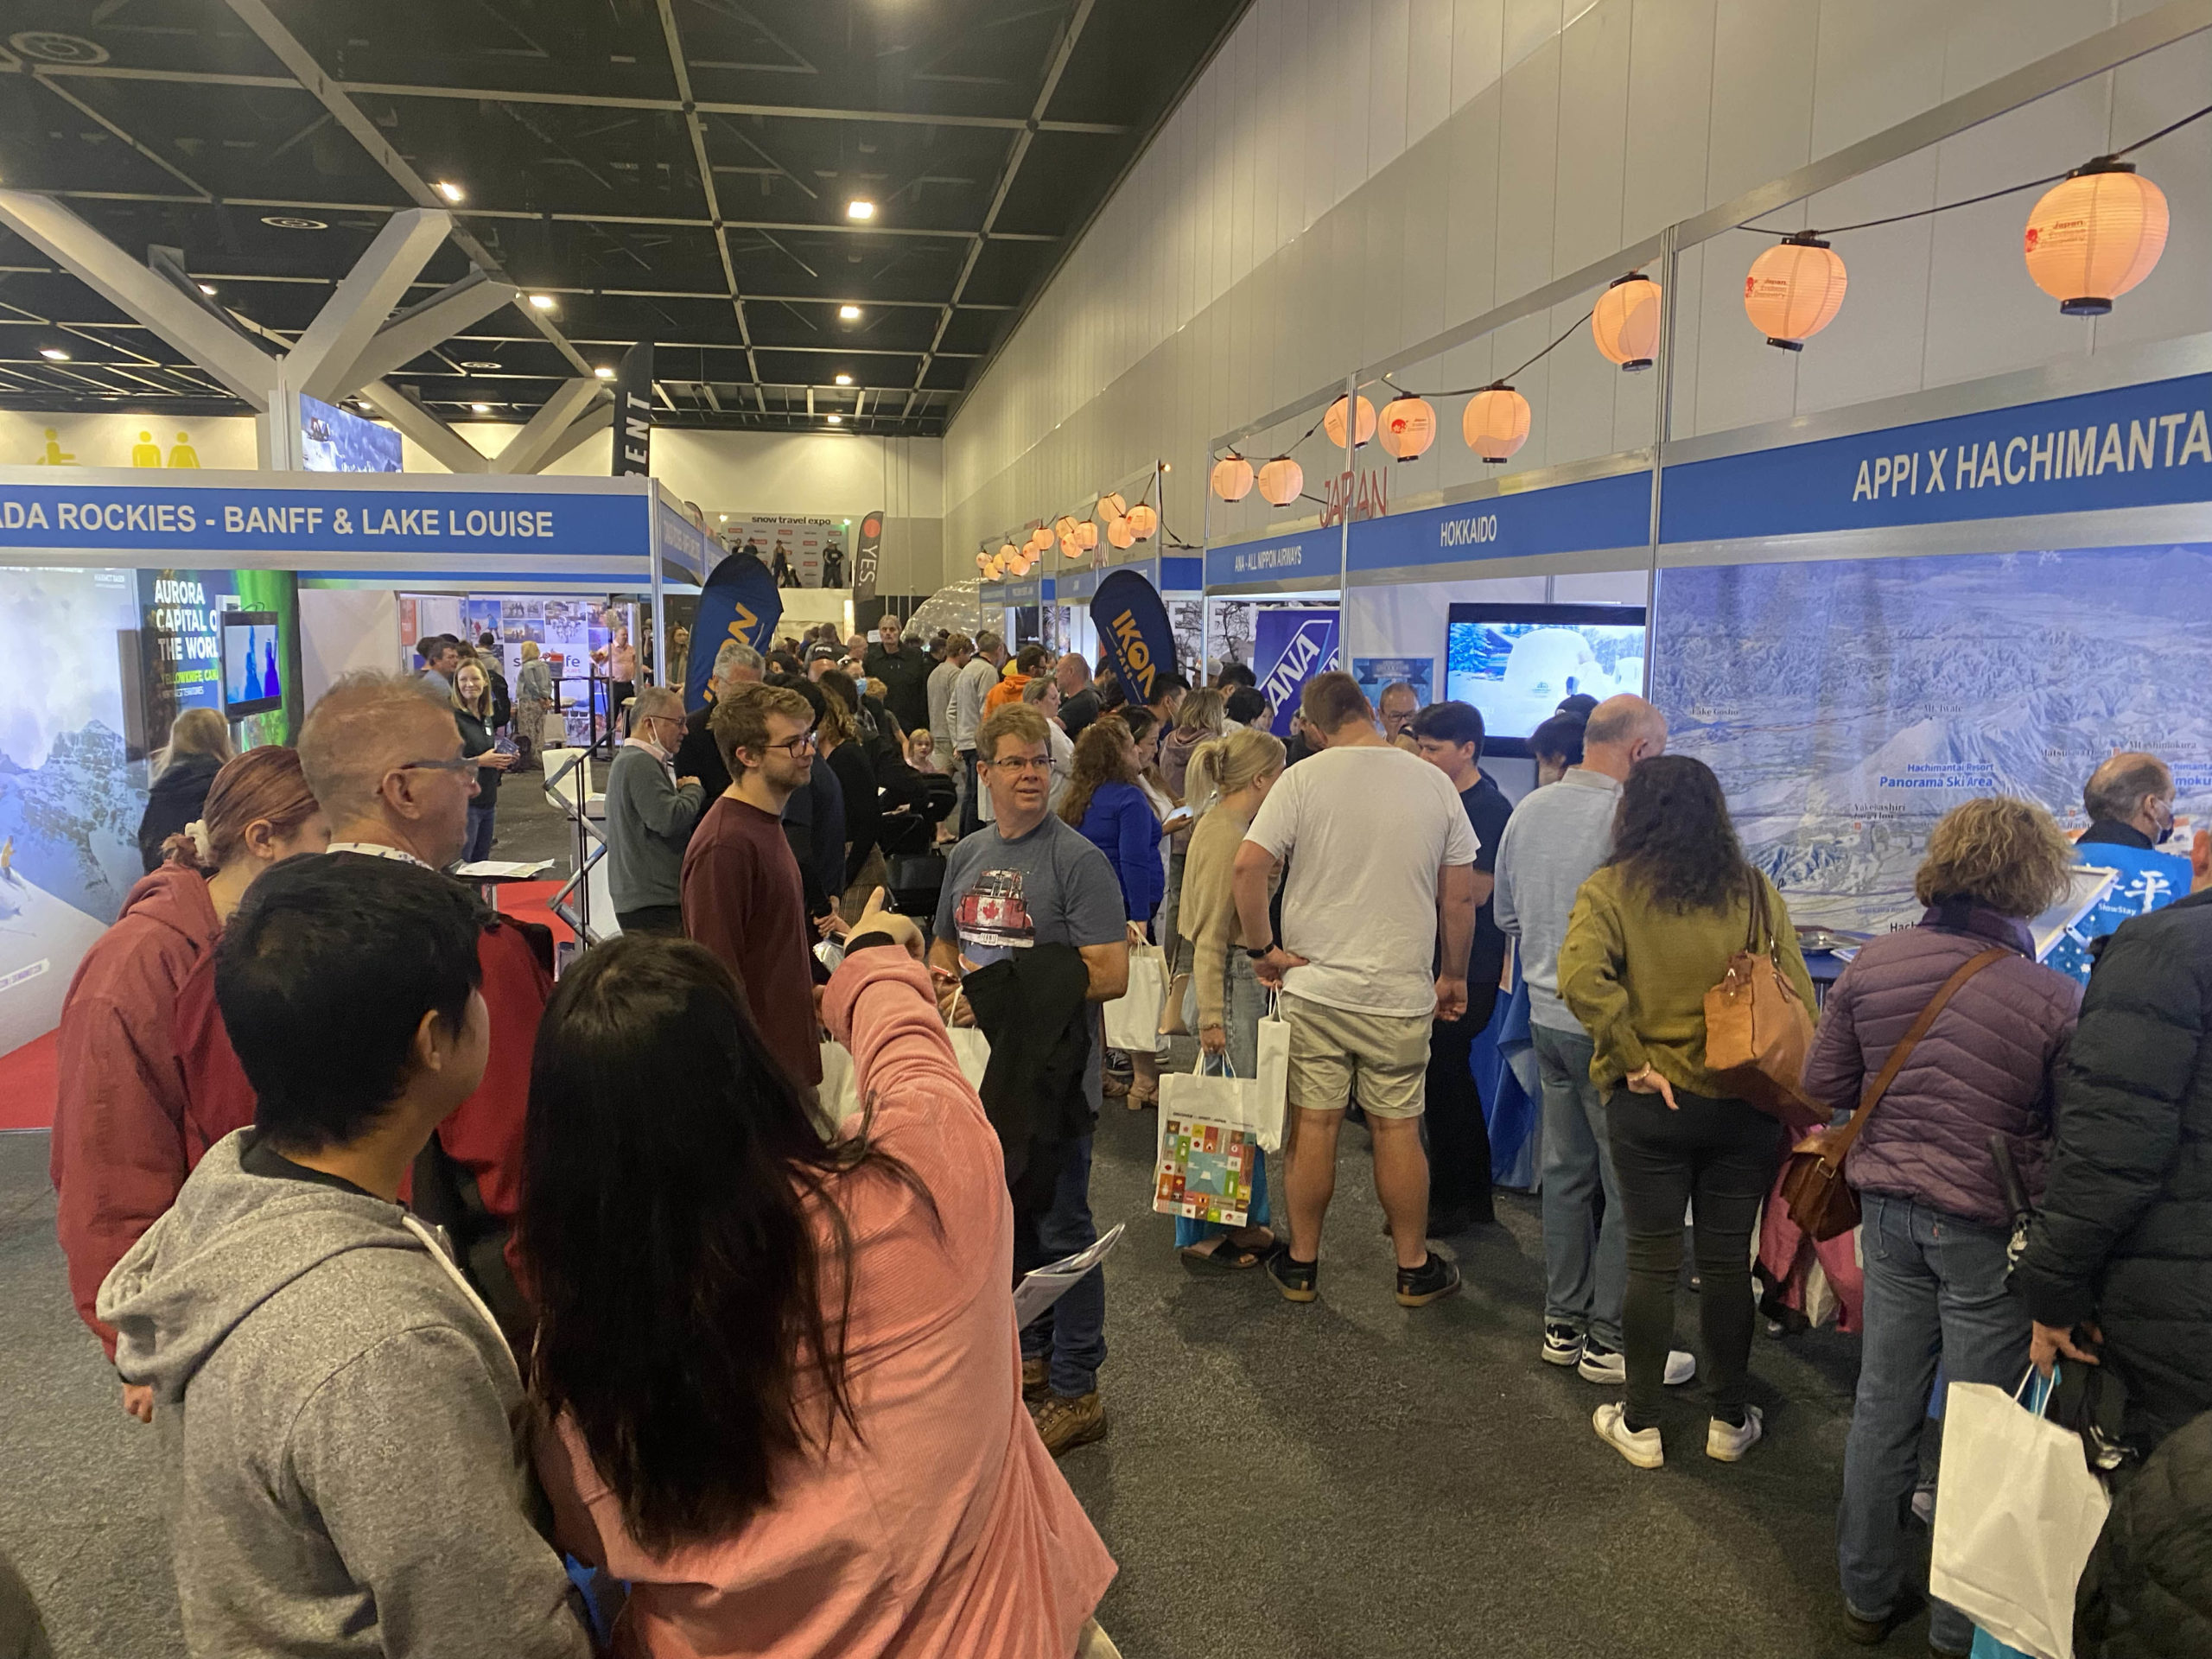 travel expo christchurch 2022